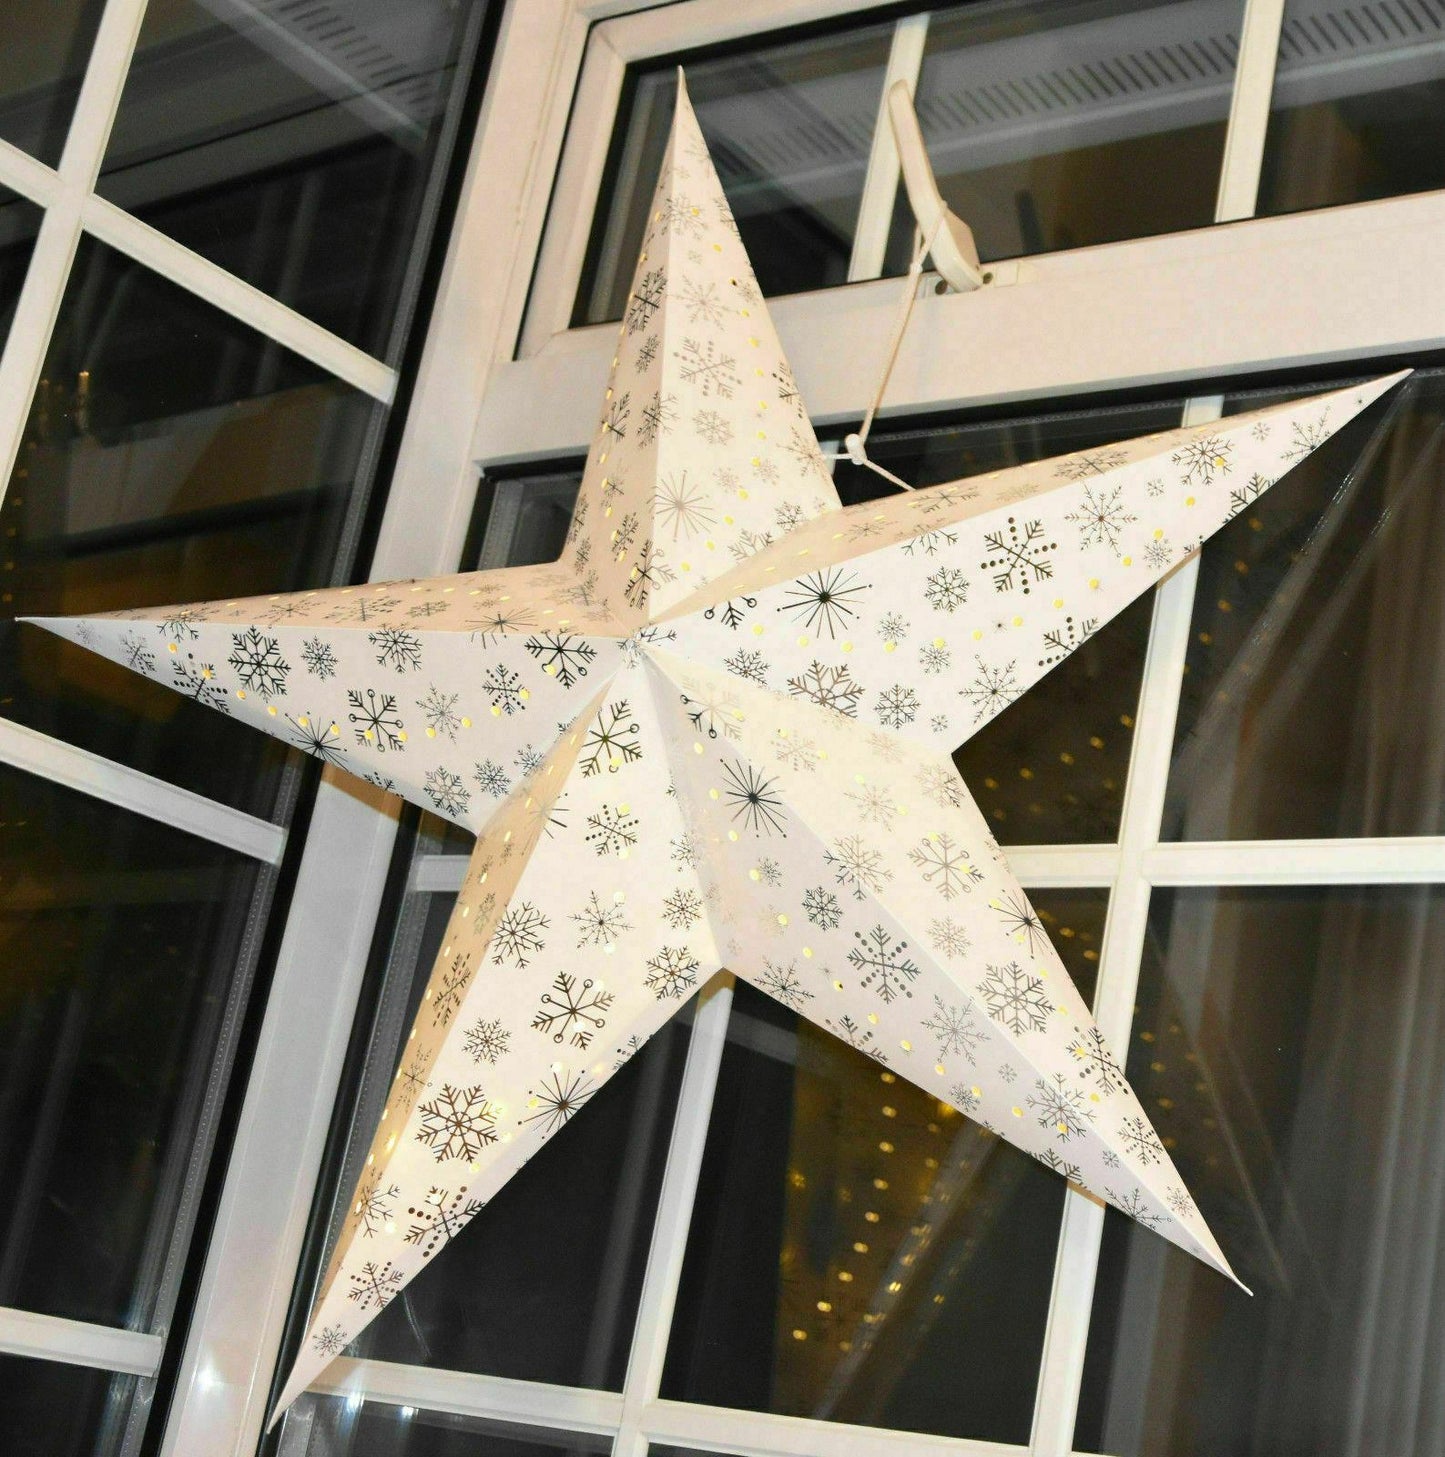 Paper Led White 40 cm Star by Geezy - UKBuyZone